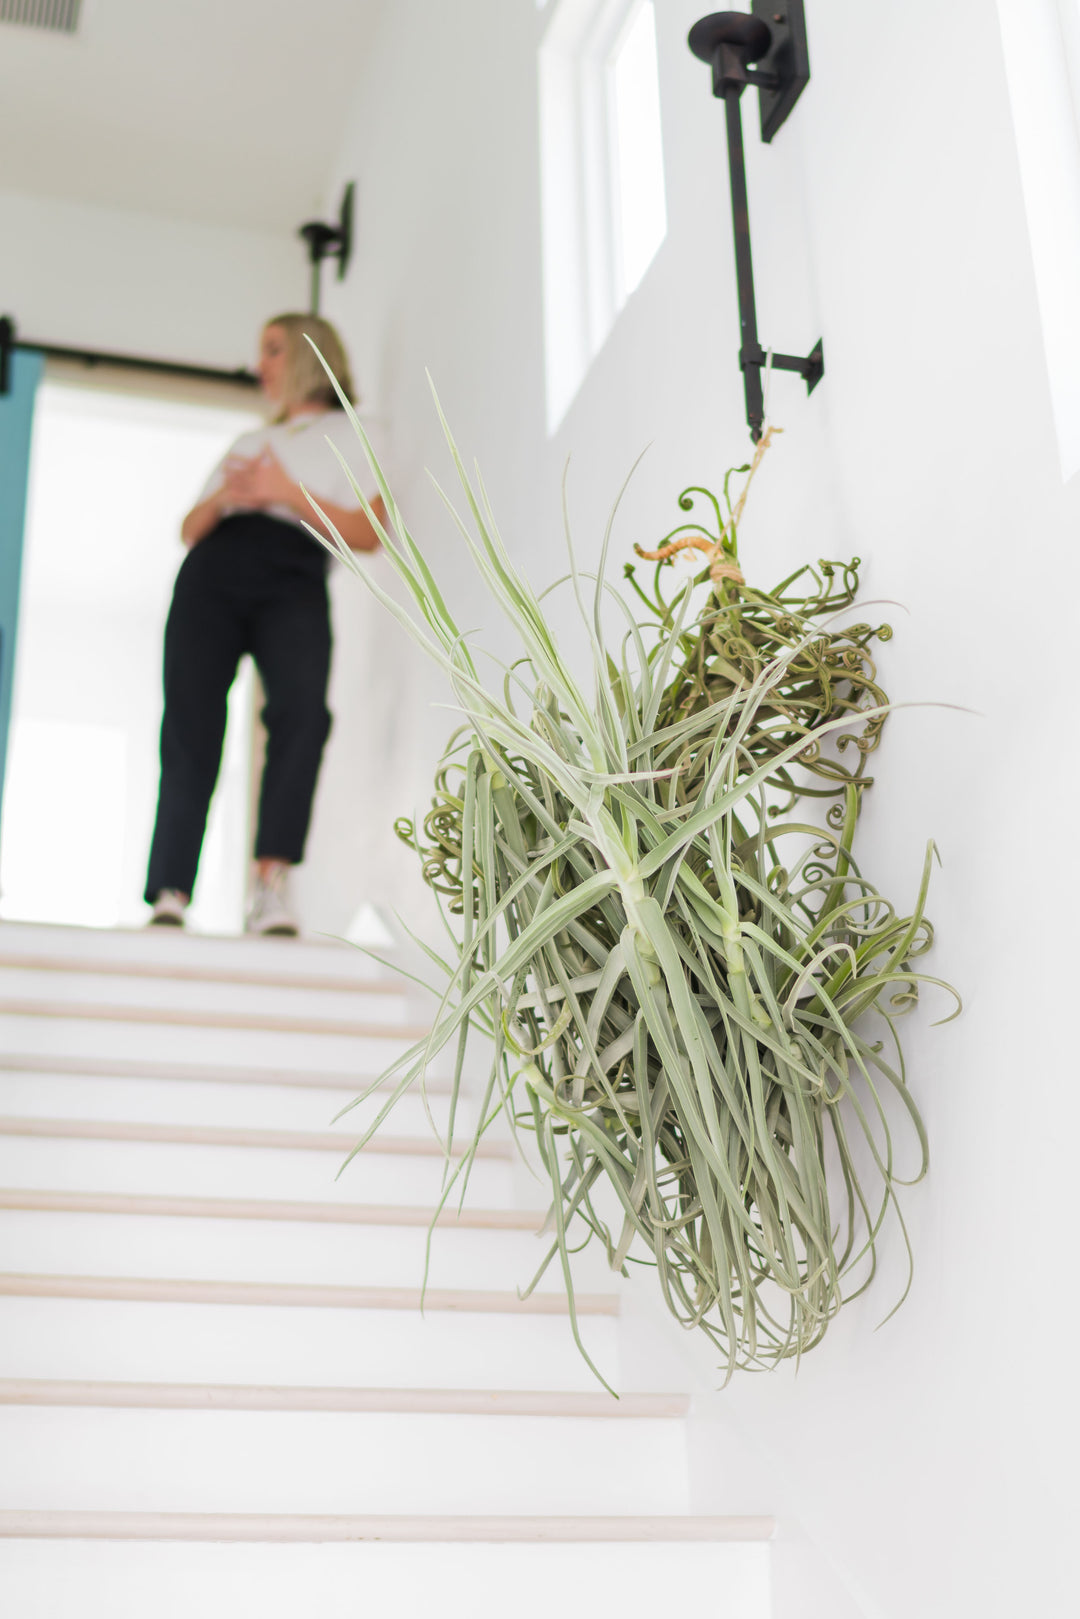 giant tillandsia duratii air plant hanging on the wall of a stairway